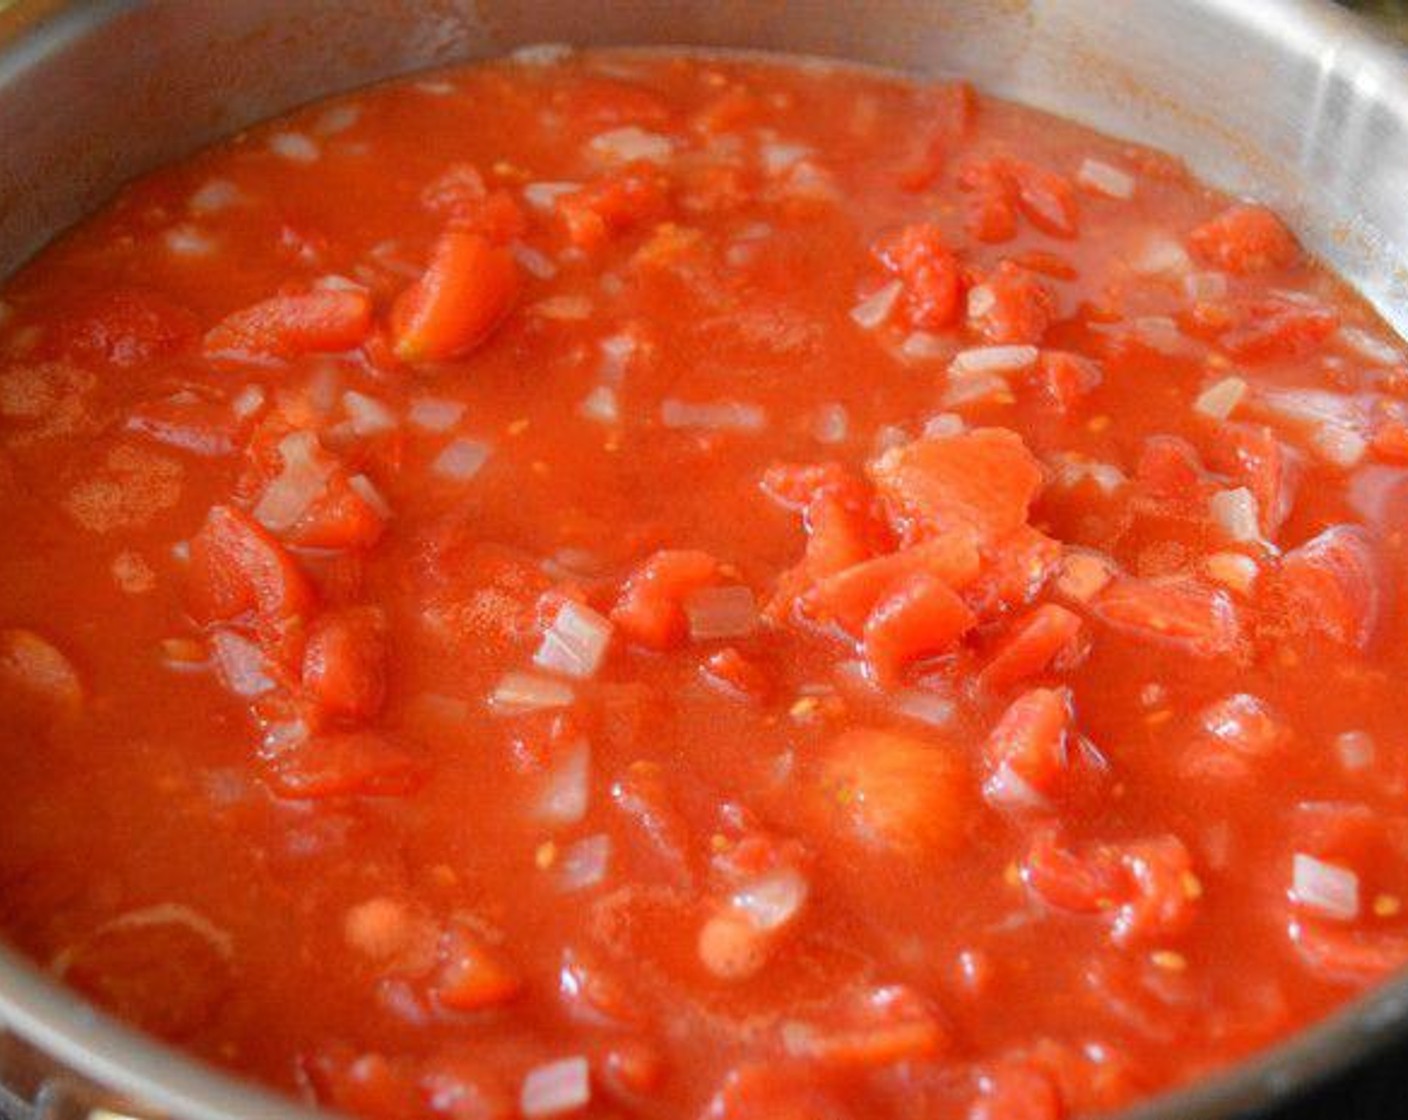 step 2 Add the White Onion (1) and Canned Diced Tomatoes (2 cans) and let it all come to a gentle boil.  Let the mixture simmer for 25 minutes so it can reduce and thicken.